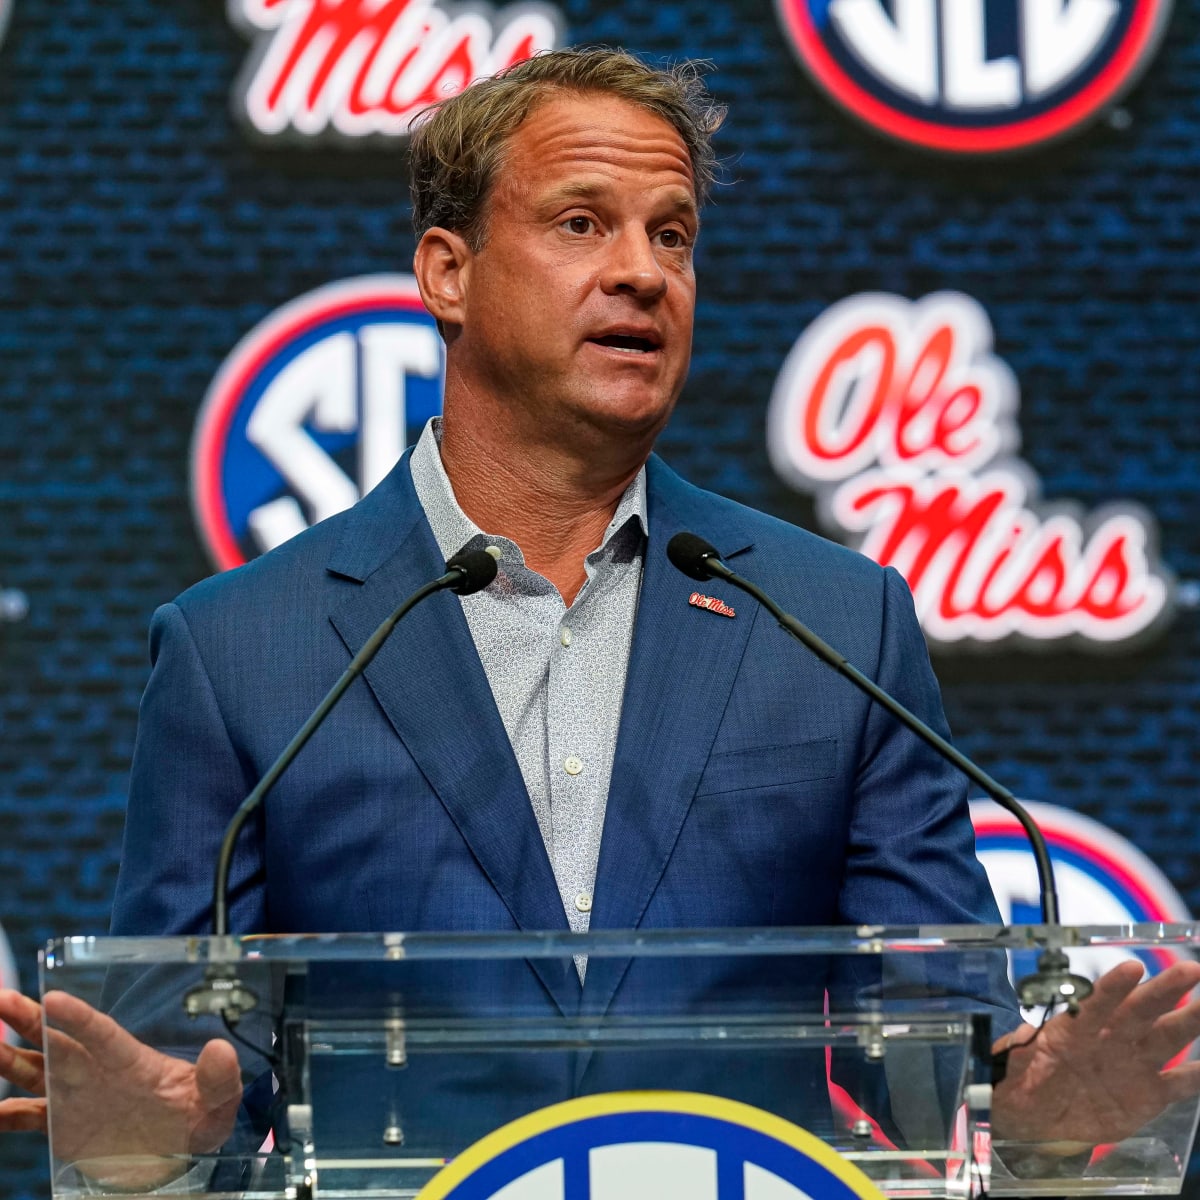 Career Of Lane Kiffin at a conference